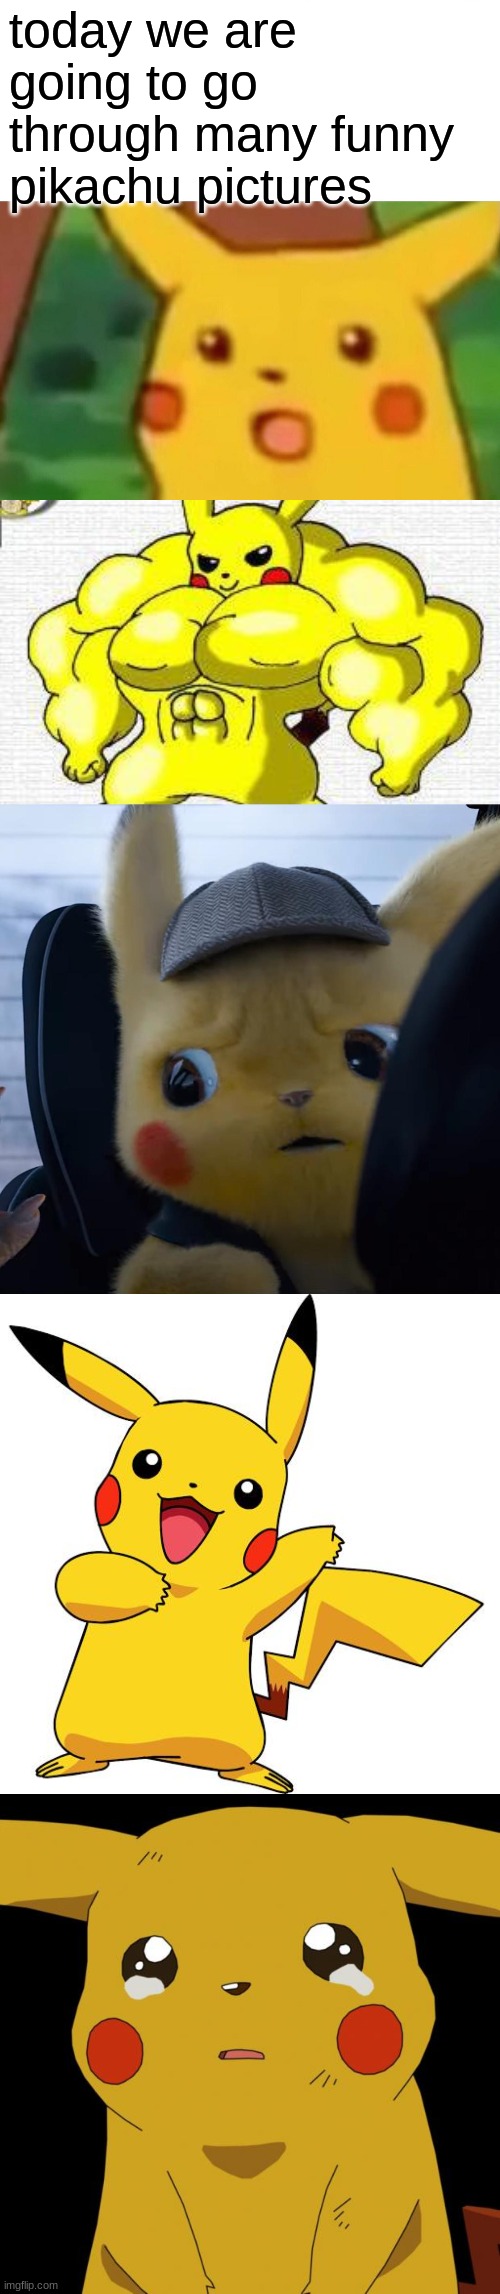 today we are going to go through many funny pikachu pictures | image tagged in memes,surprised pikachu,pickachu on steroids,unsettled detective pikachu,pikachu,pikachu crying | made w/ Imgflip meme maker